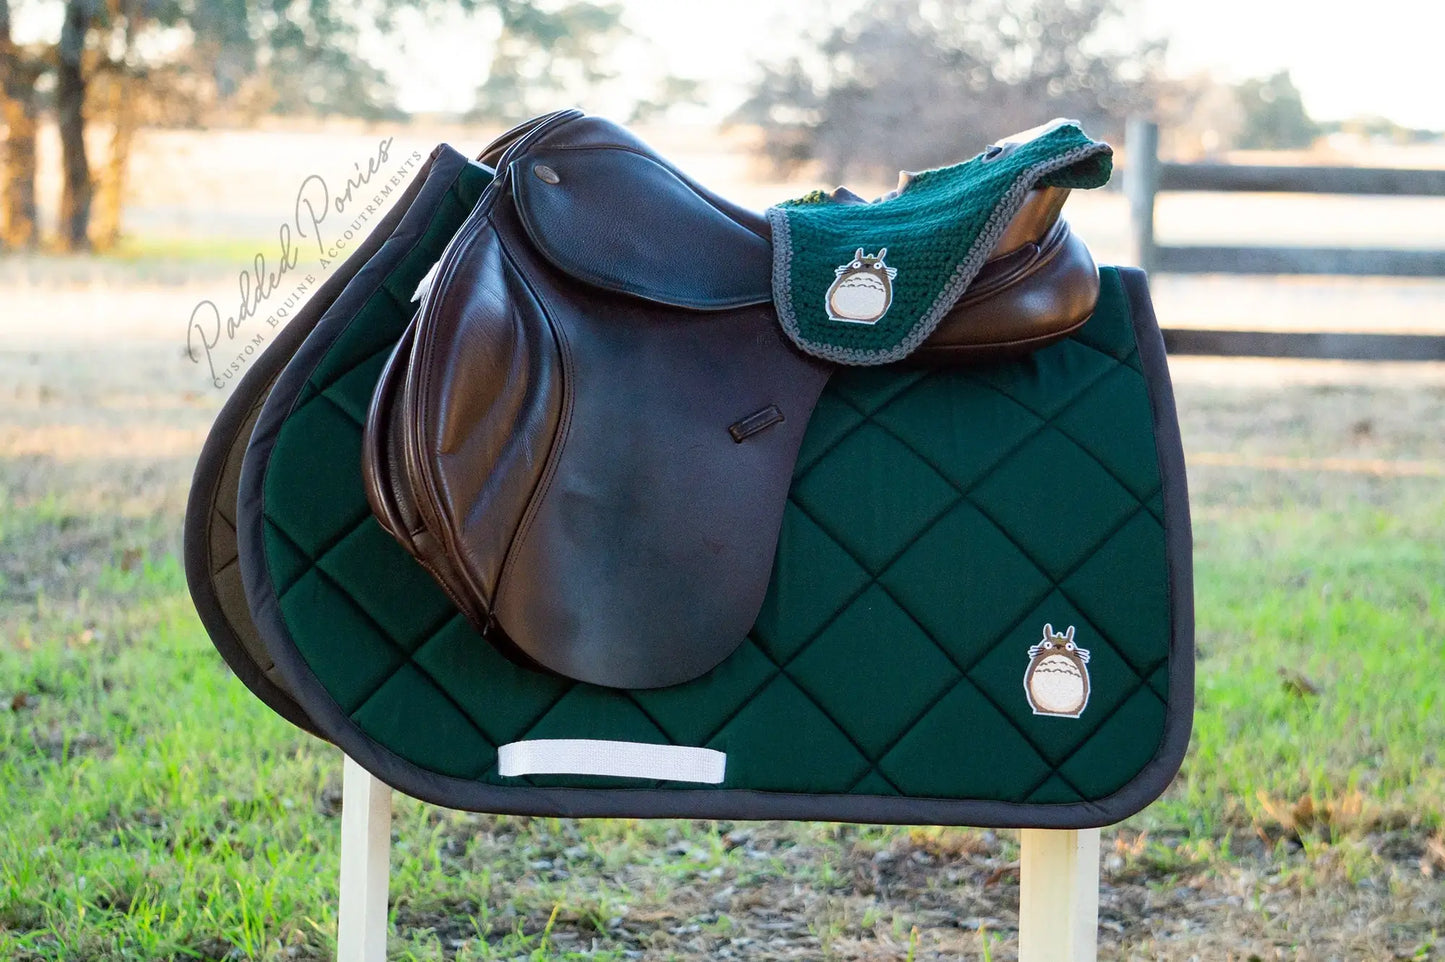 Hunter Green and Gray My Neighbor Totoro Ghibli Anime Patch Fly Veil Bonnet with Matching Saddle Pad